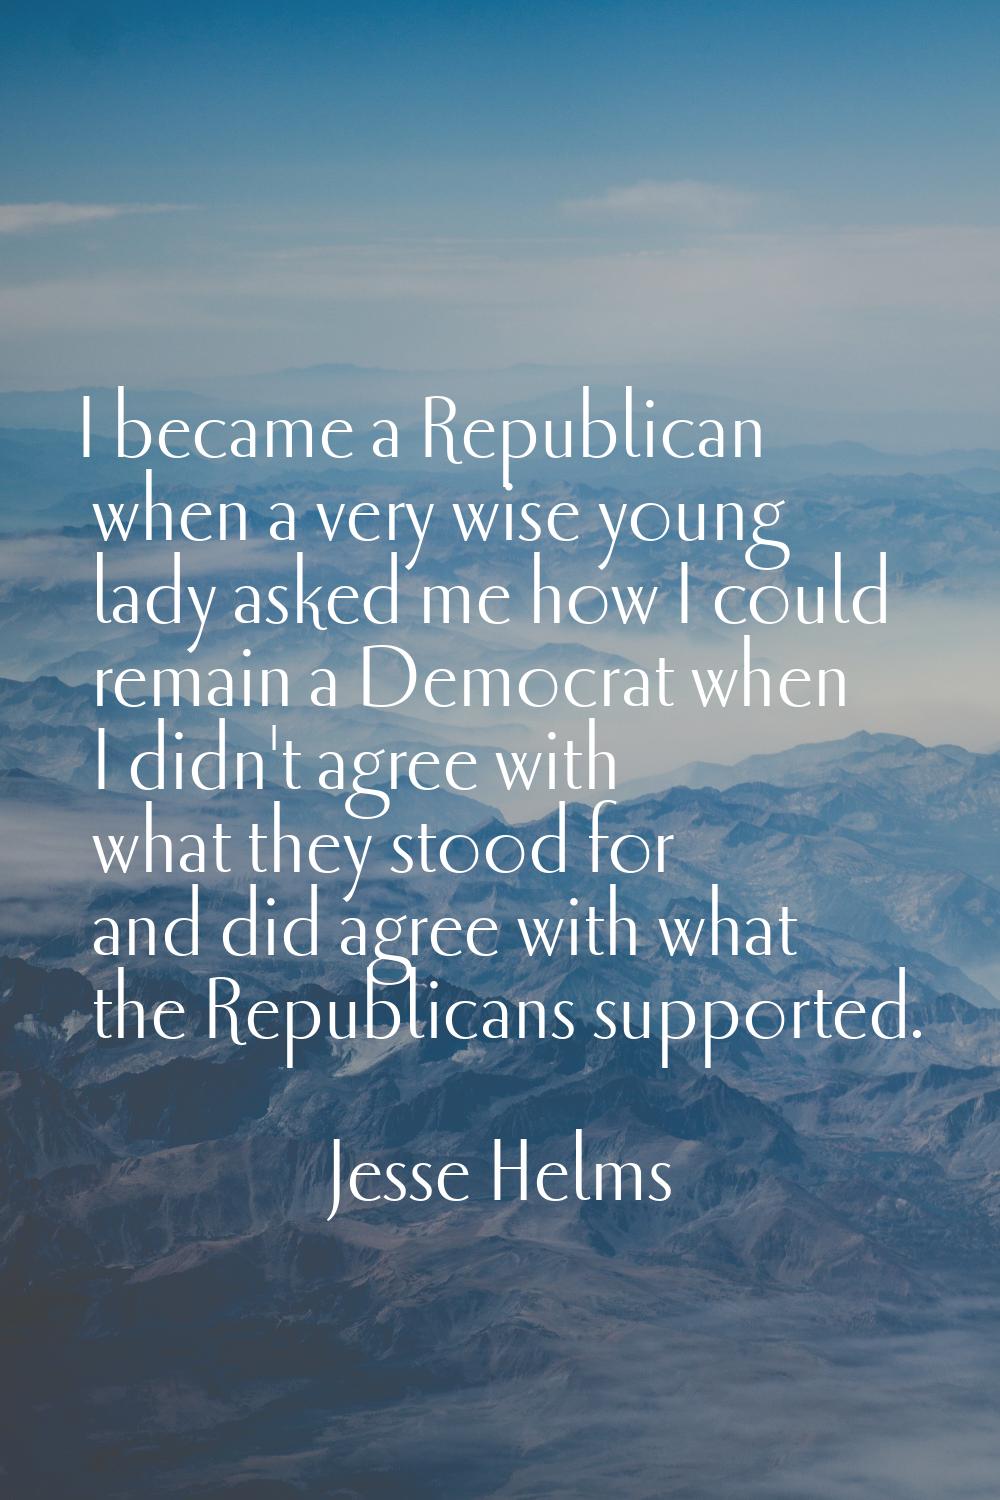 I became a Republican when a very wise young lady asked me how I could remain a Democrat when I did